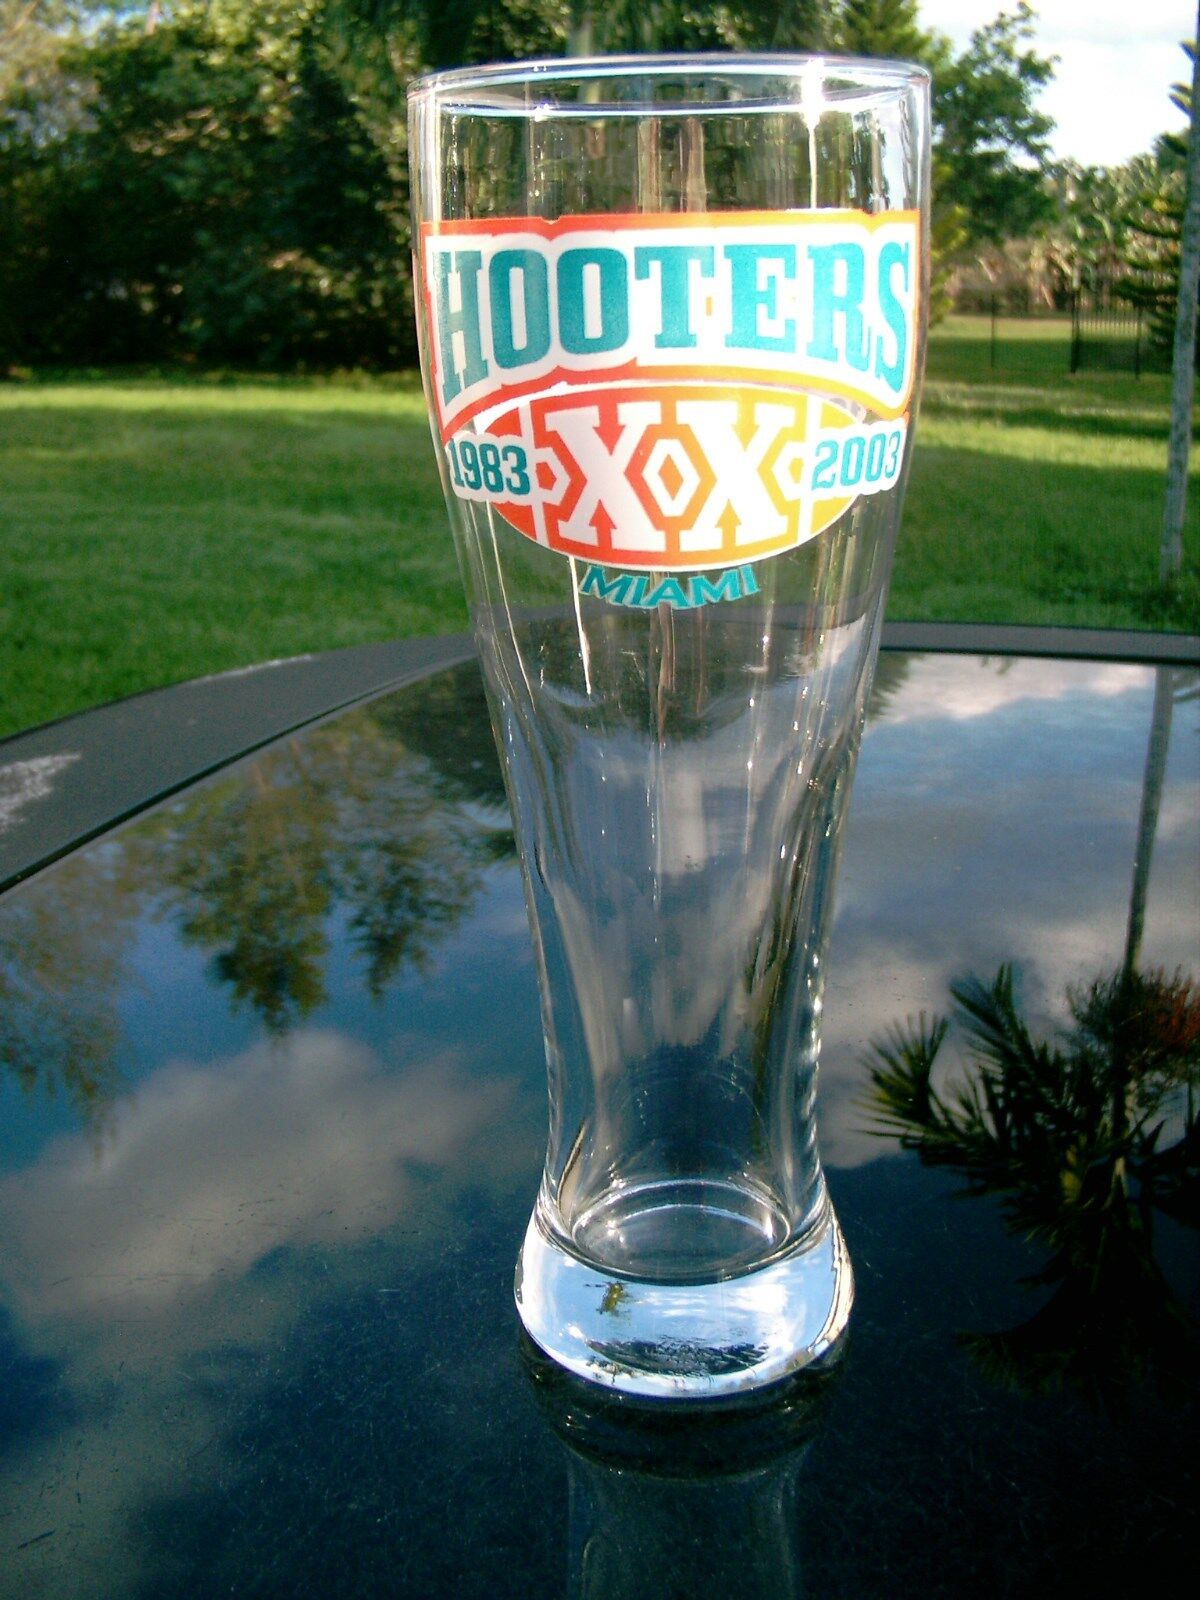 HOOTERS 1983-2003 XX MIAMI  LOGO  9.5 IN. BEER GLASS  NICE SOUVENIR